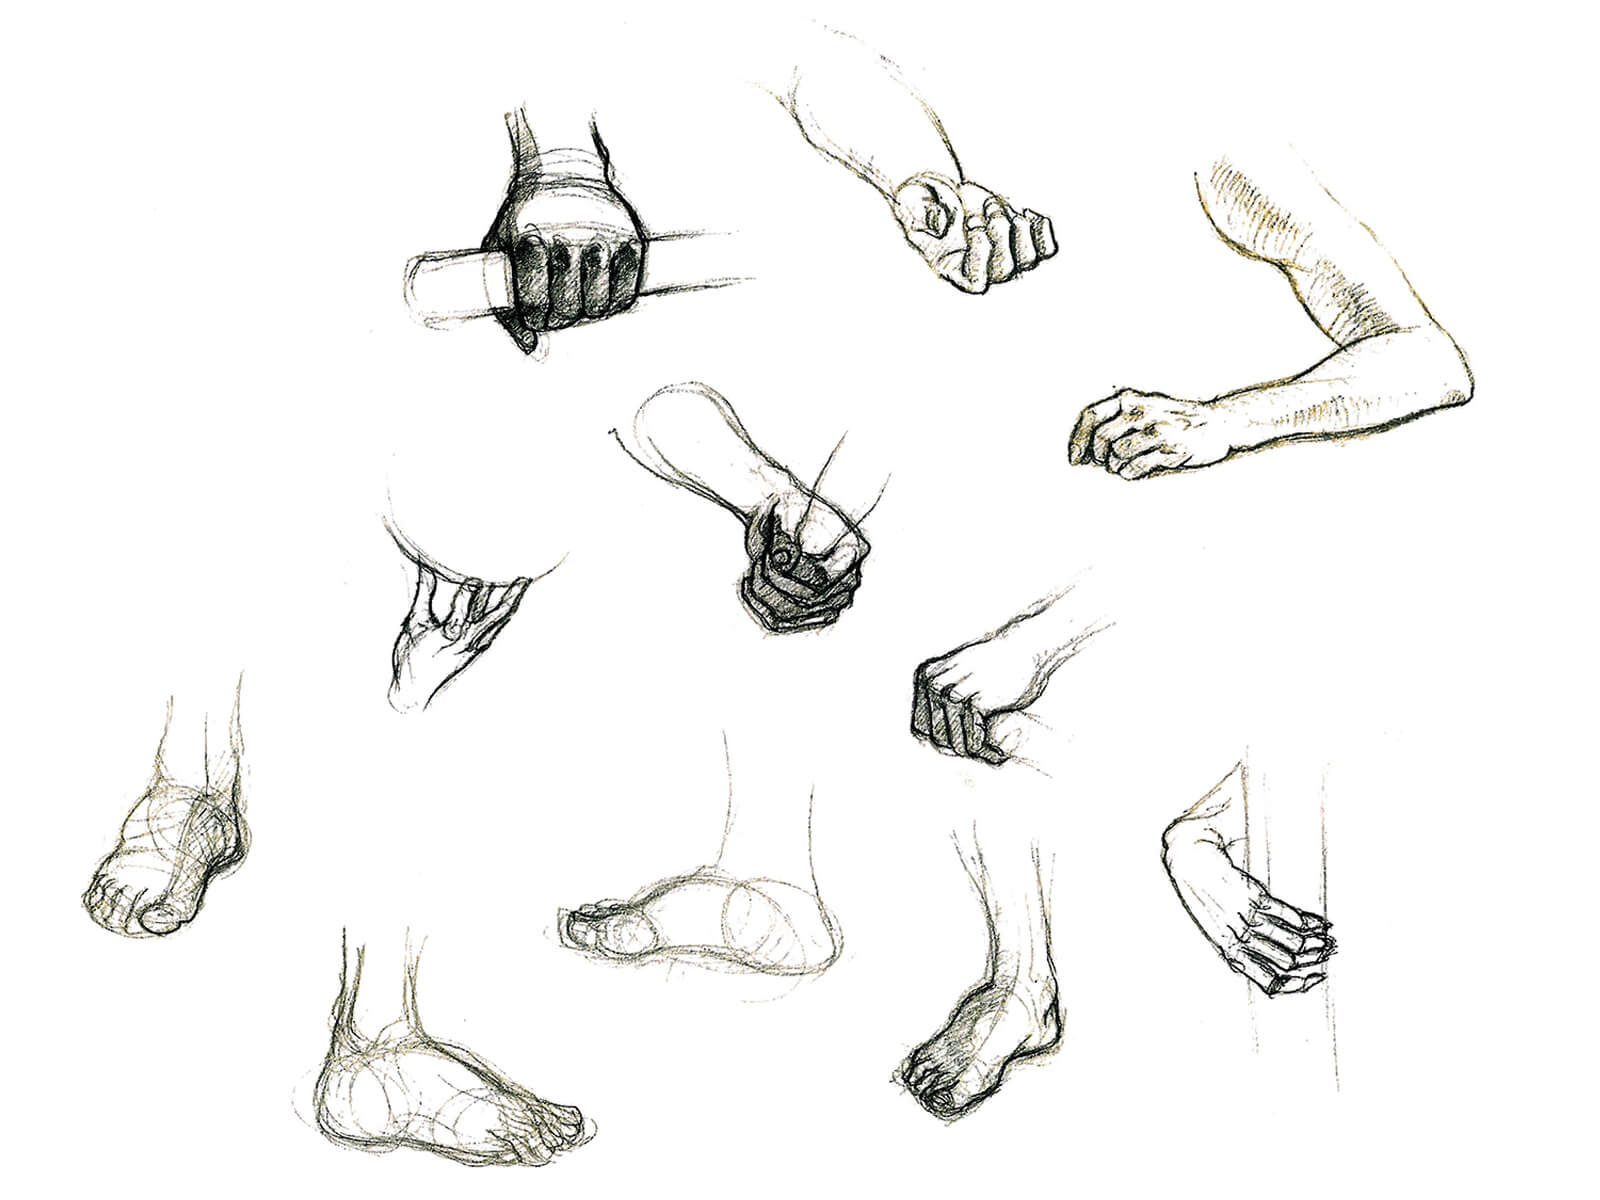 Black-and-white sketches of hands, arms, and feet in different poses, grasping and extending.